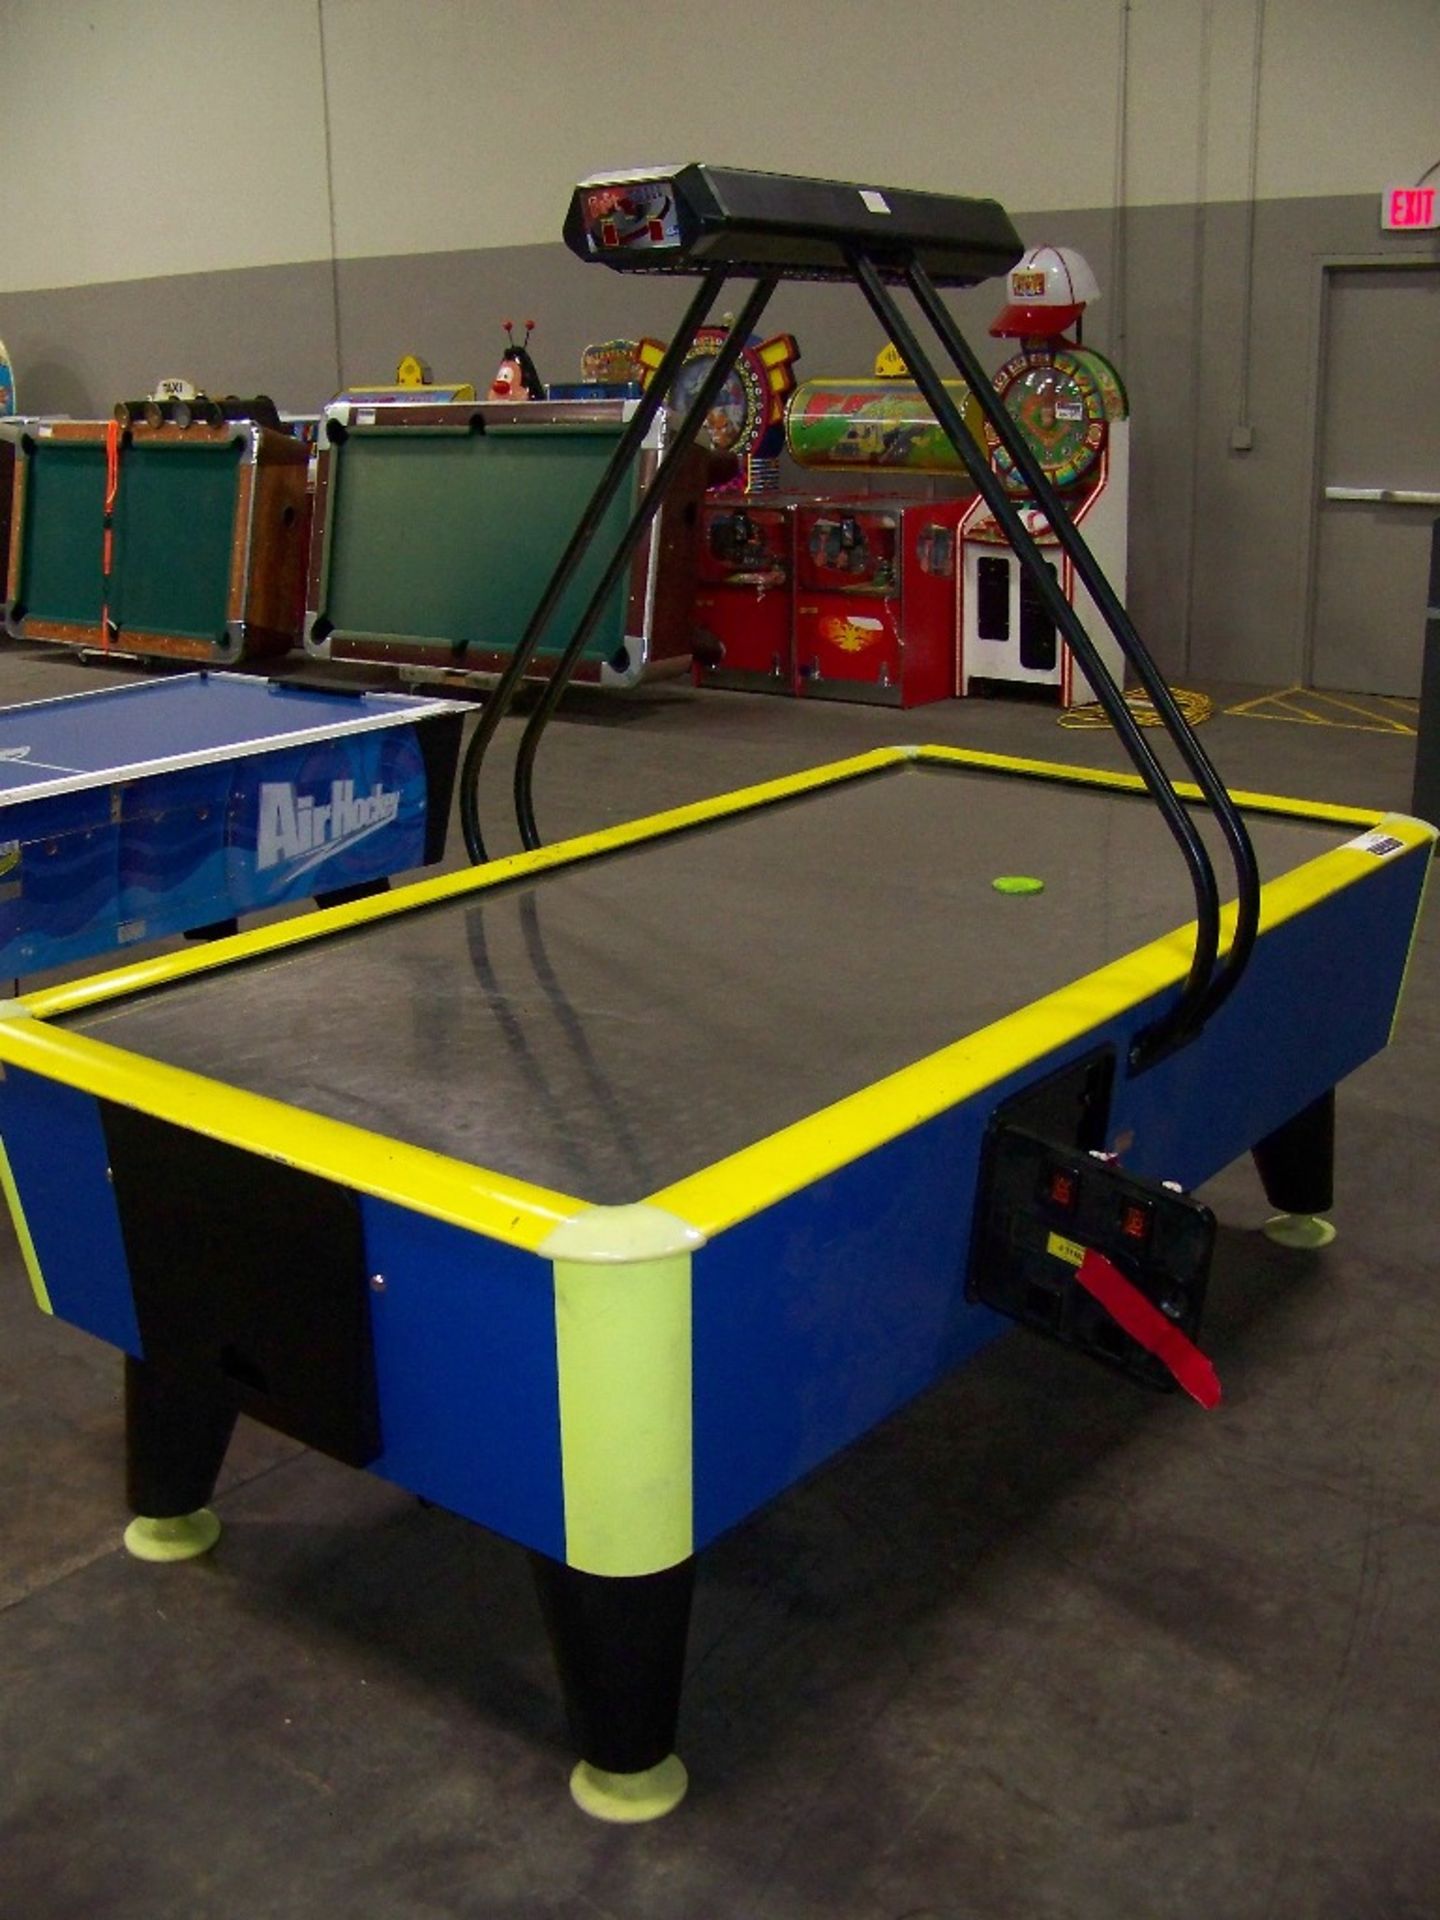 AIR HOCKEY FAST TRACK ICE WITH OVERHEAD SCORE